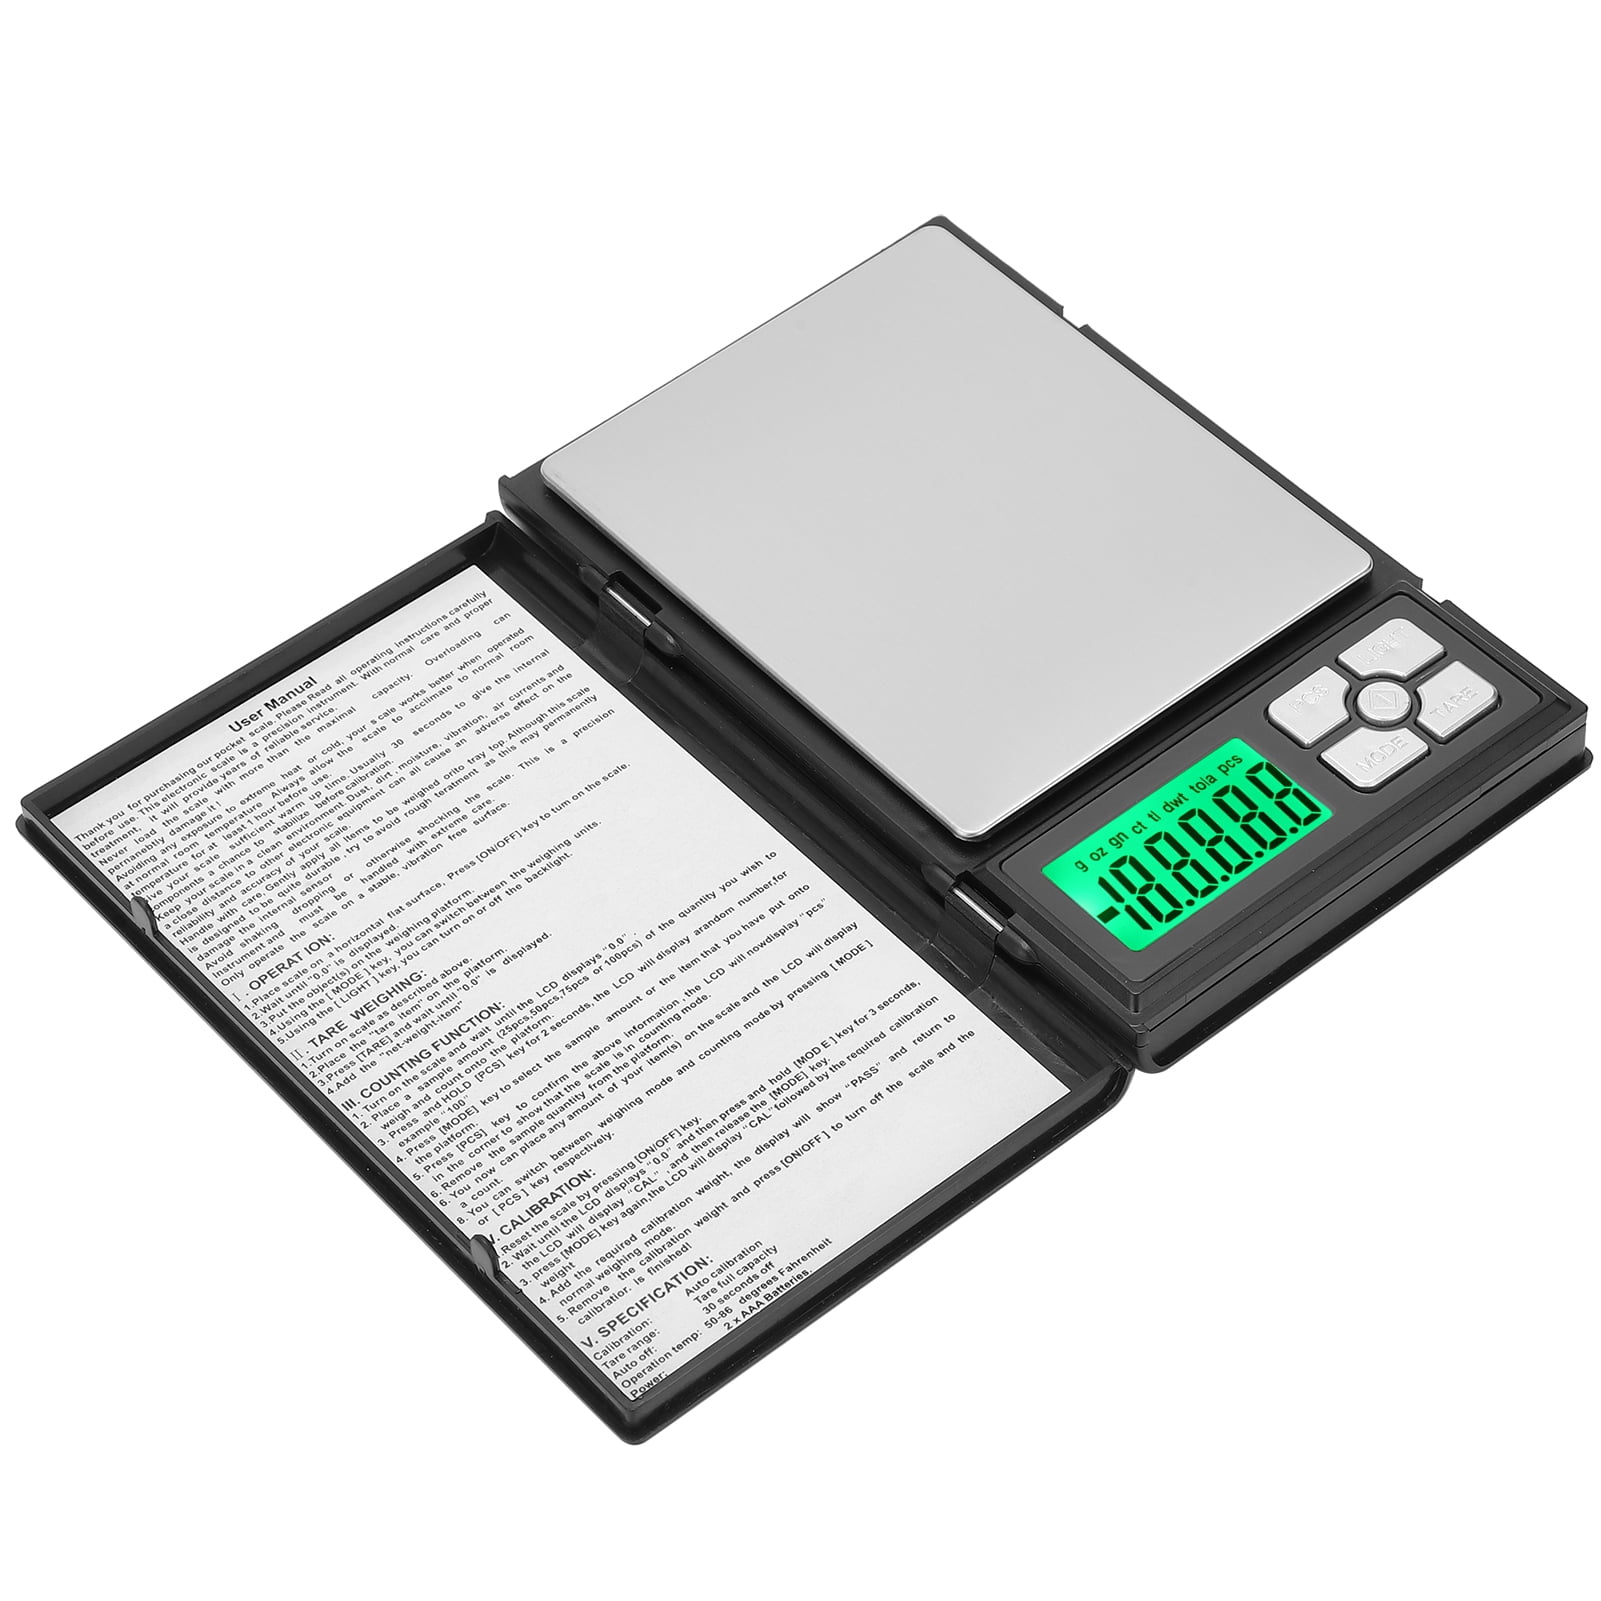 Loewten Digital Scale, Calibration Food Scale, For Baking 0.01g